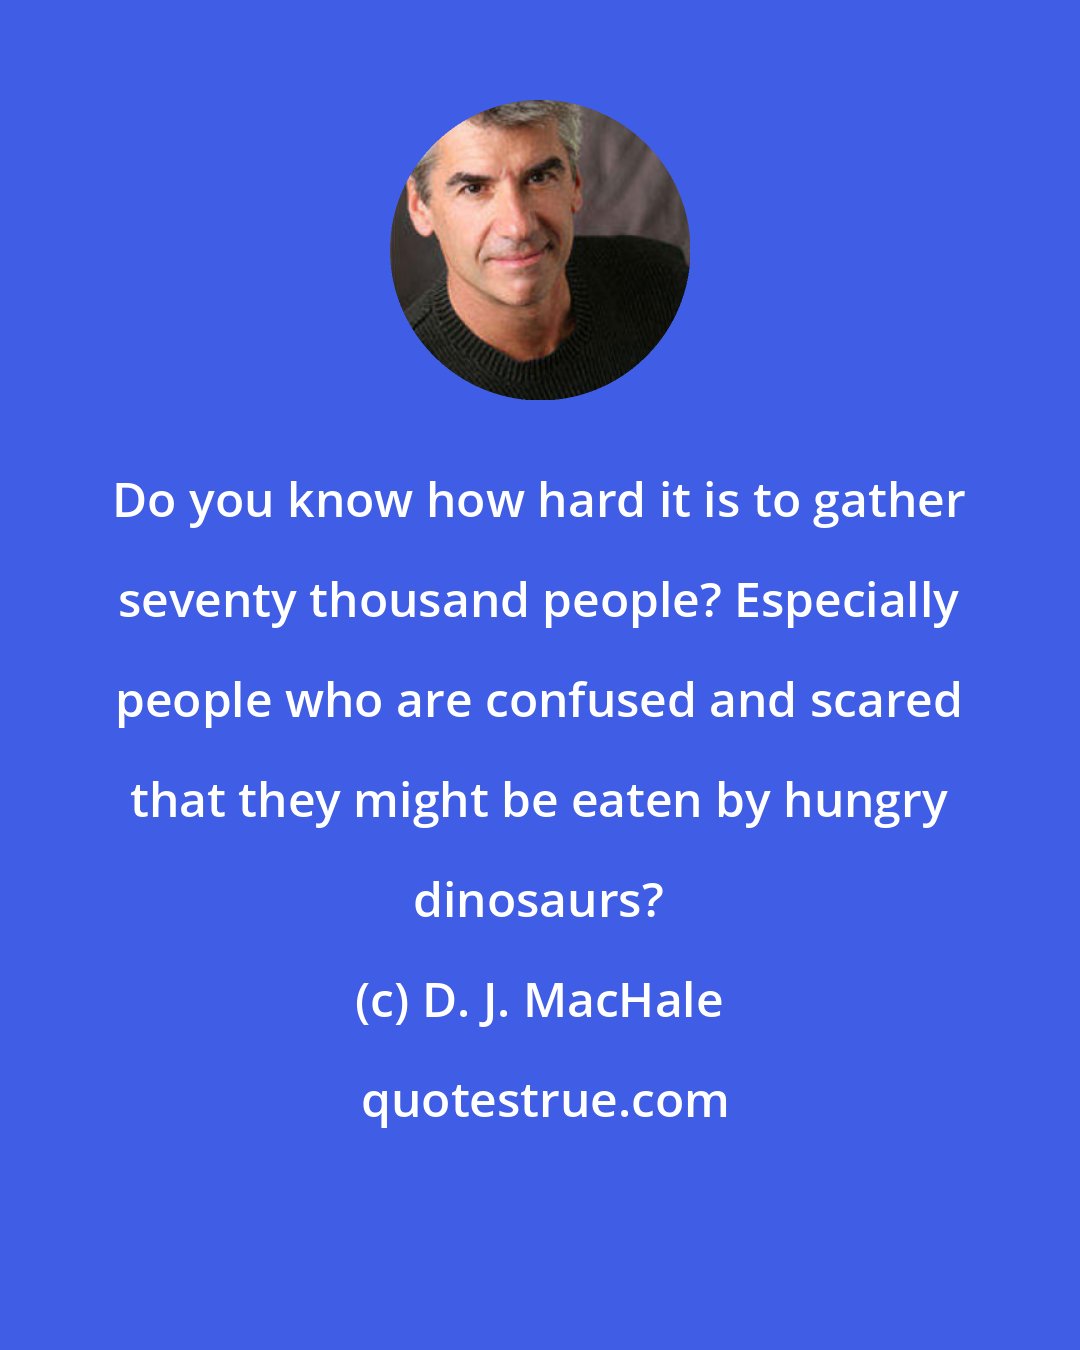 D. J. MacHale: Do you know how hard it is to gather seventy thousand people? Especially people who are confused and scared that they might be eaten by hungry dinosaurs?